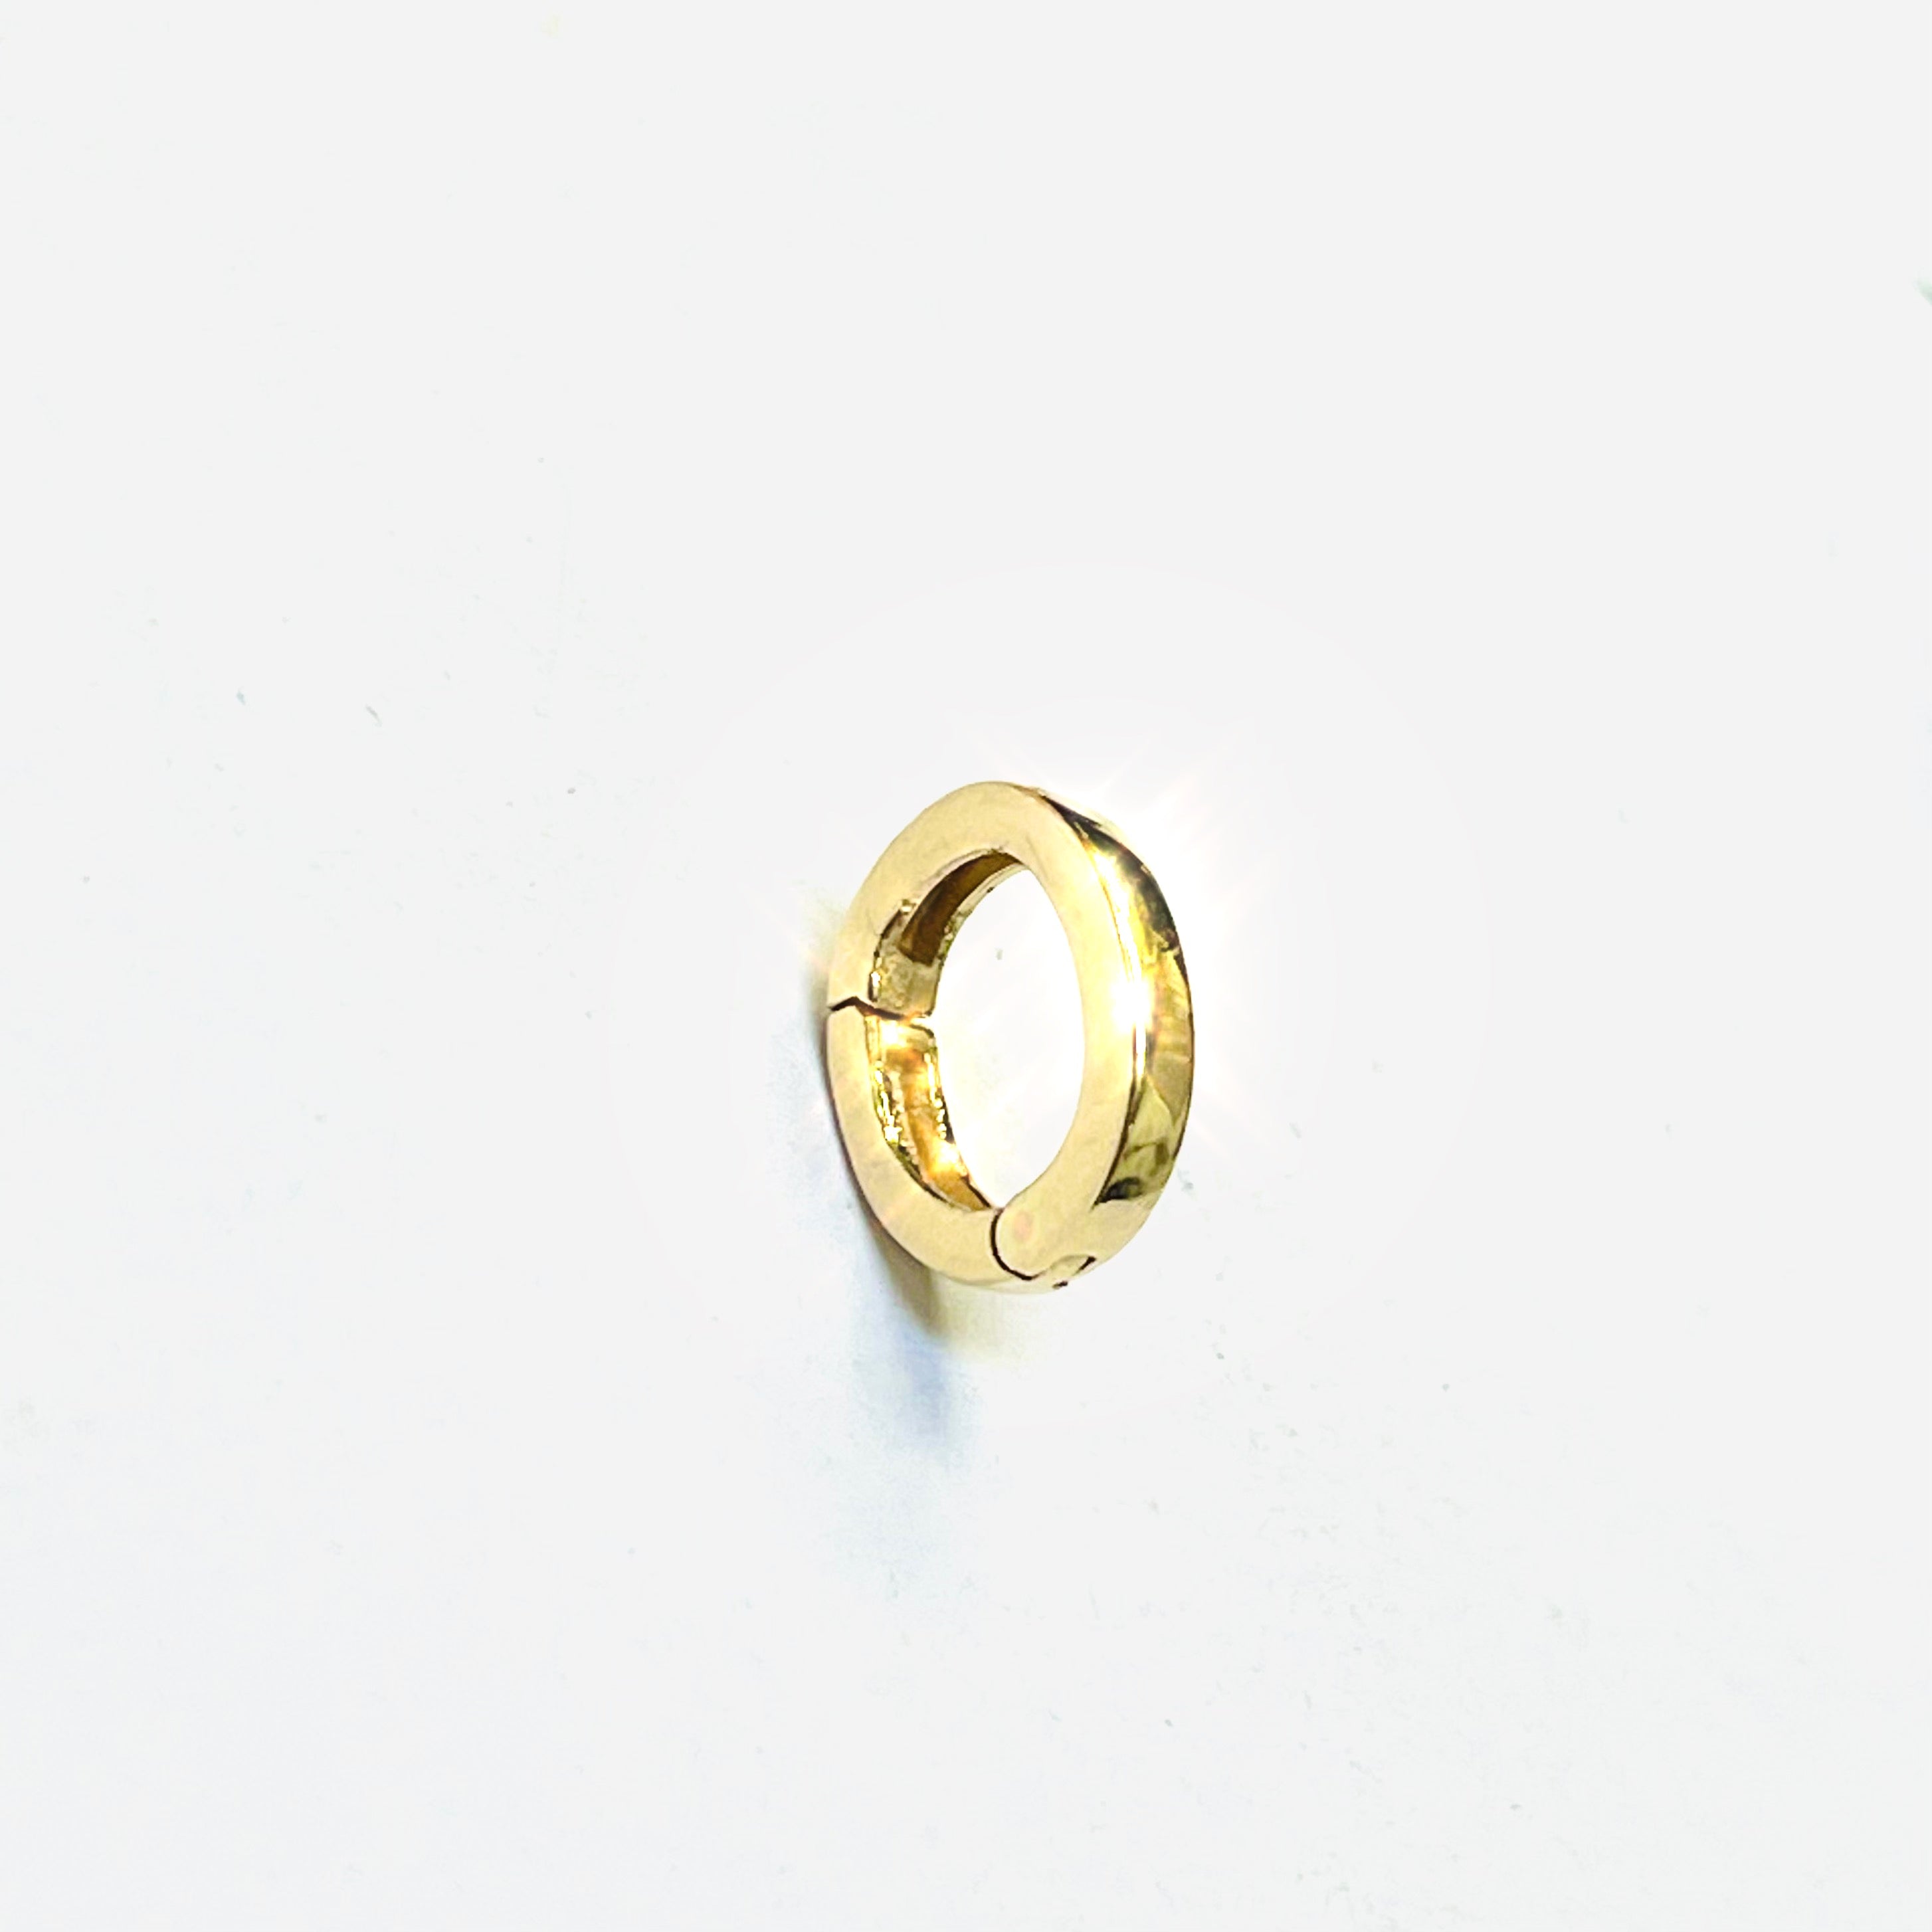 Solid 14K Gold Oval Carabiner Charm Connector 9x8mm